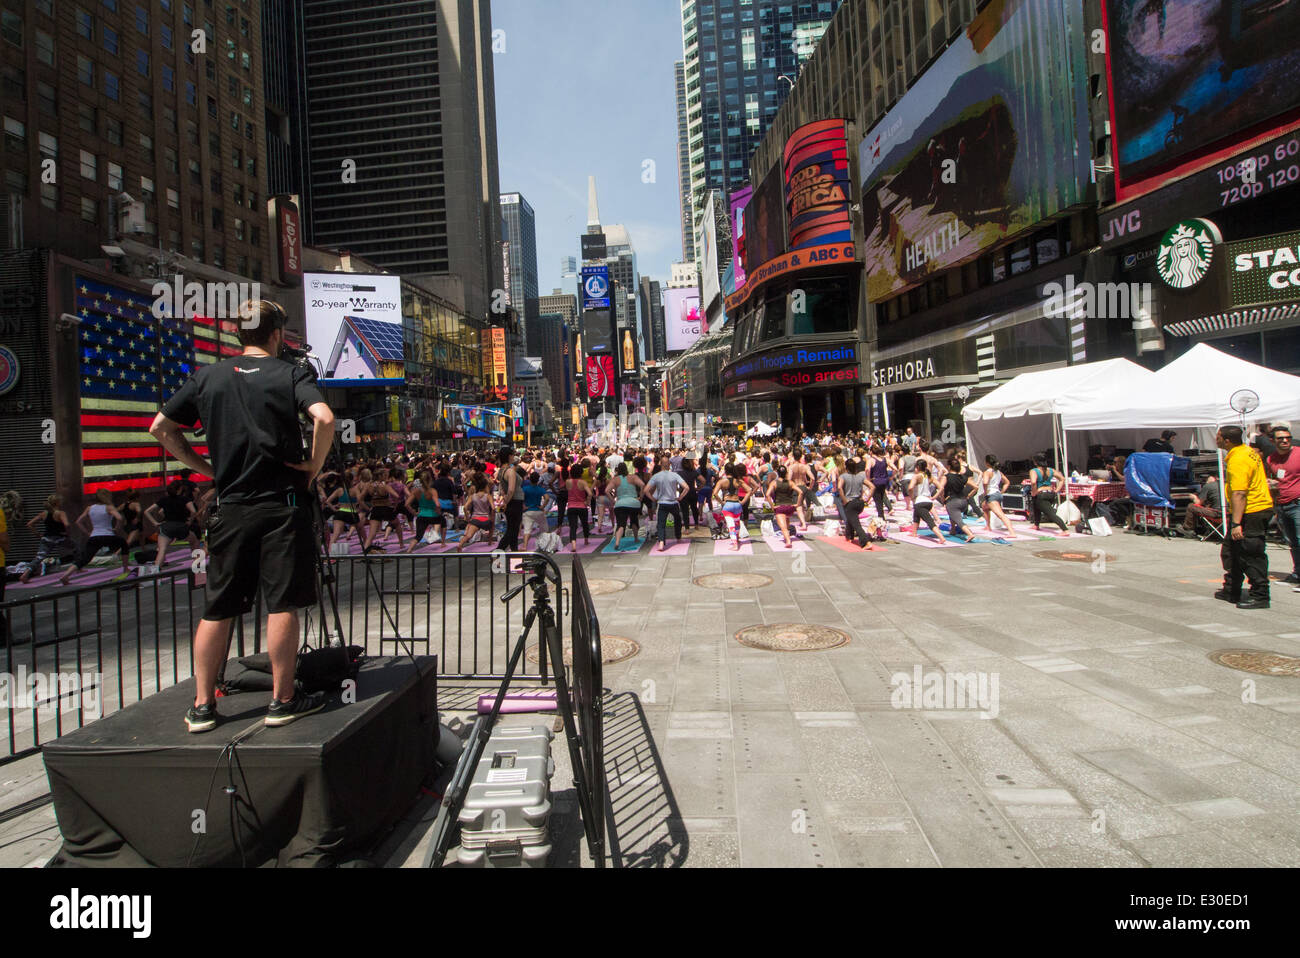 NEW YORK, NY - JUNE 21:  New Yorkers are marking the first day of summer by practicing Yoga in Times Square during the 12th annual Solstice in Times Square on June 21, 2014 in New York City.  (Photo by Donald Bowers) Stock Photo